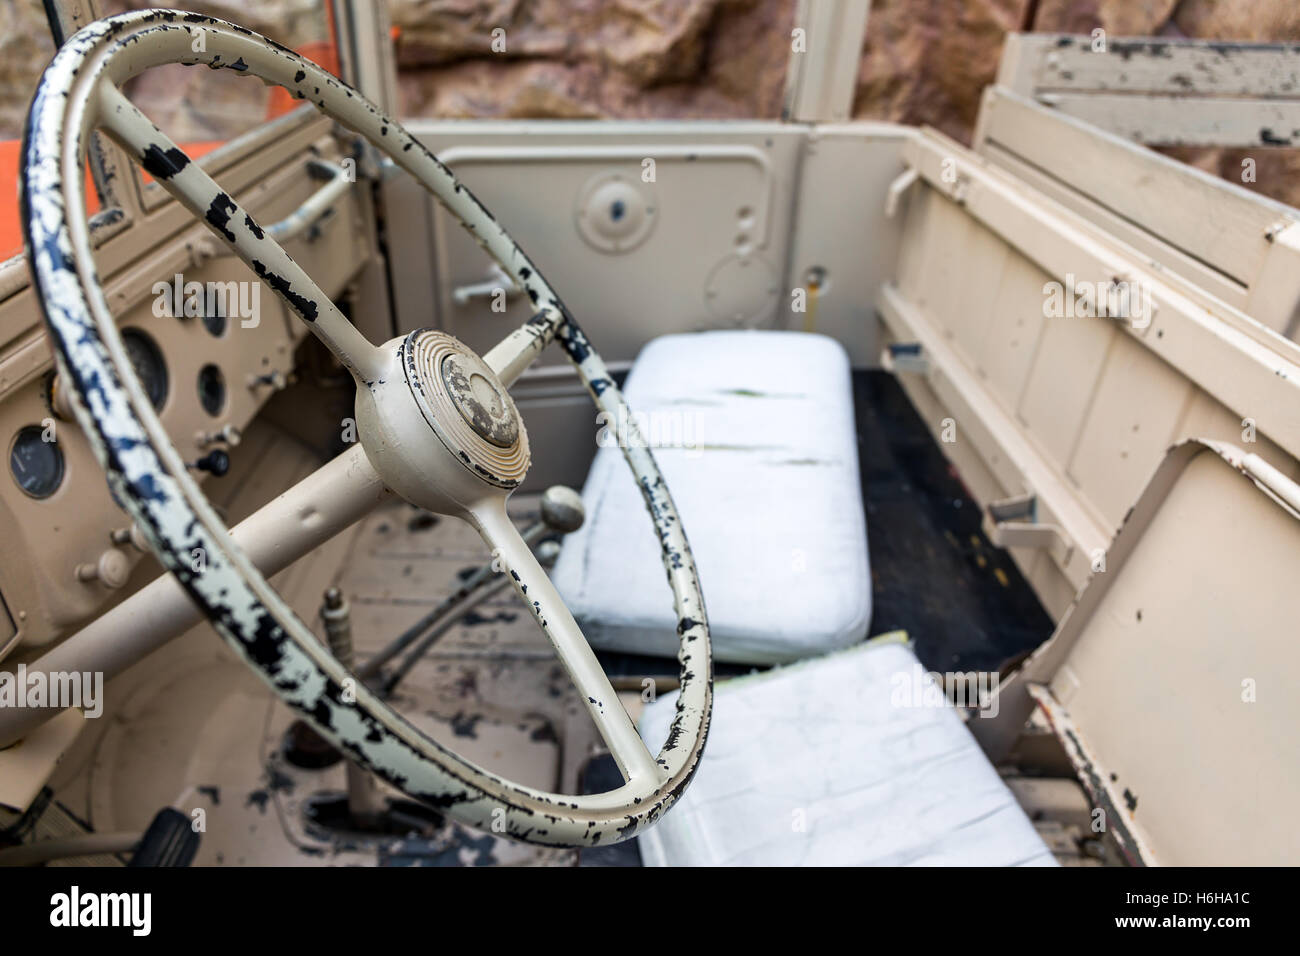 Interior of old and rusty military vehicle. Stock Photo